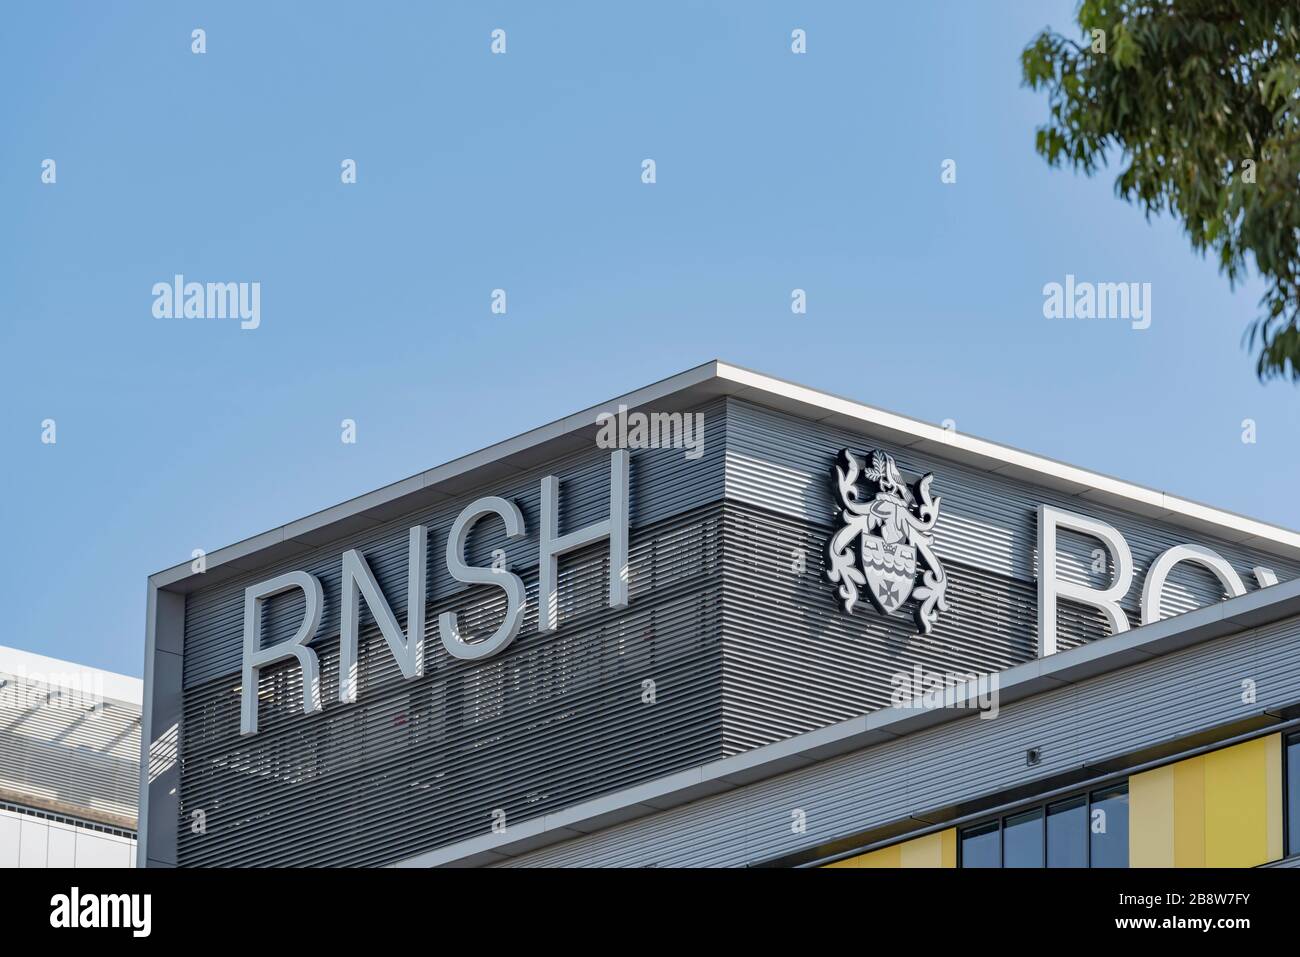 The RNSH logo on the top of the main facility at the Royal North Shore (acute and general) Hospital in St Leonards, Sydney, New South Wales, Australia Stock Photo